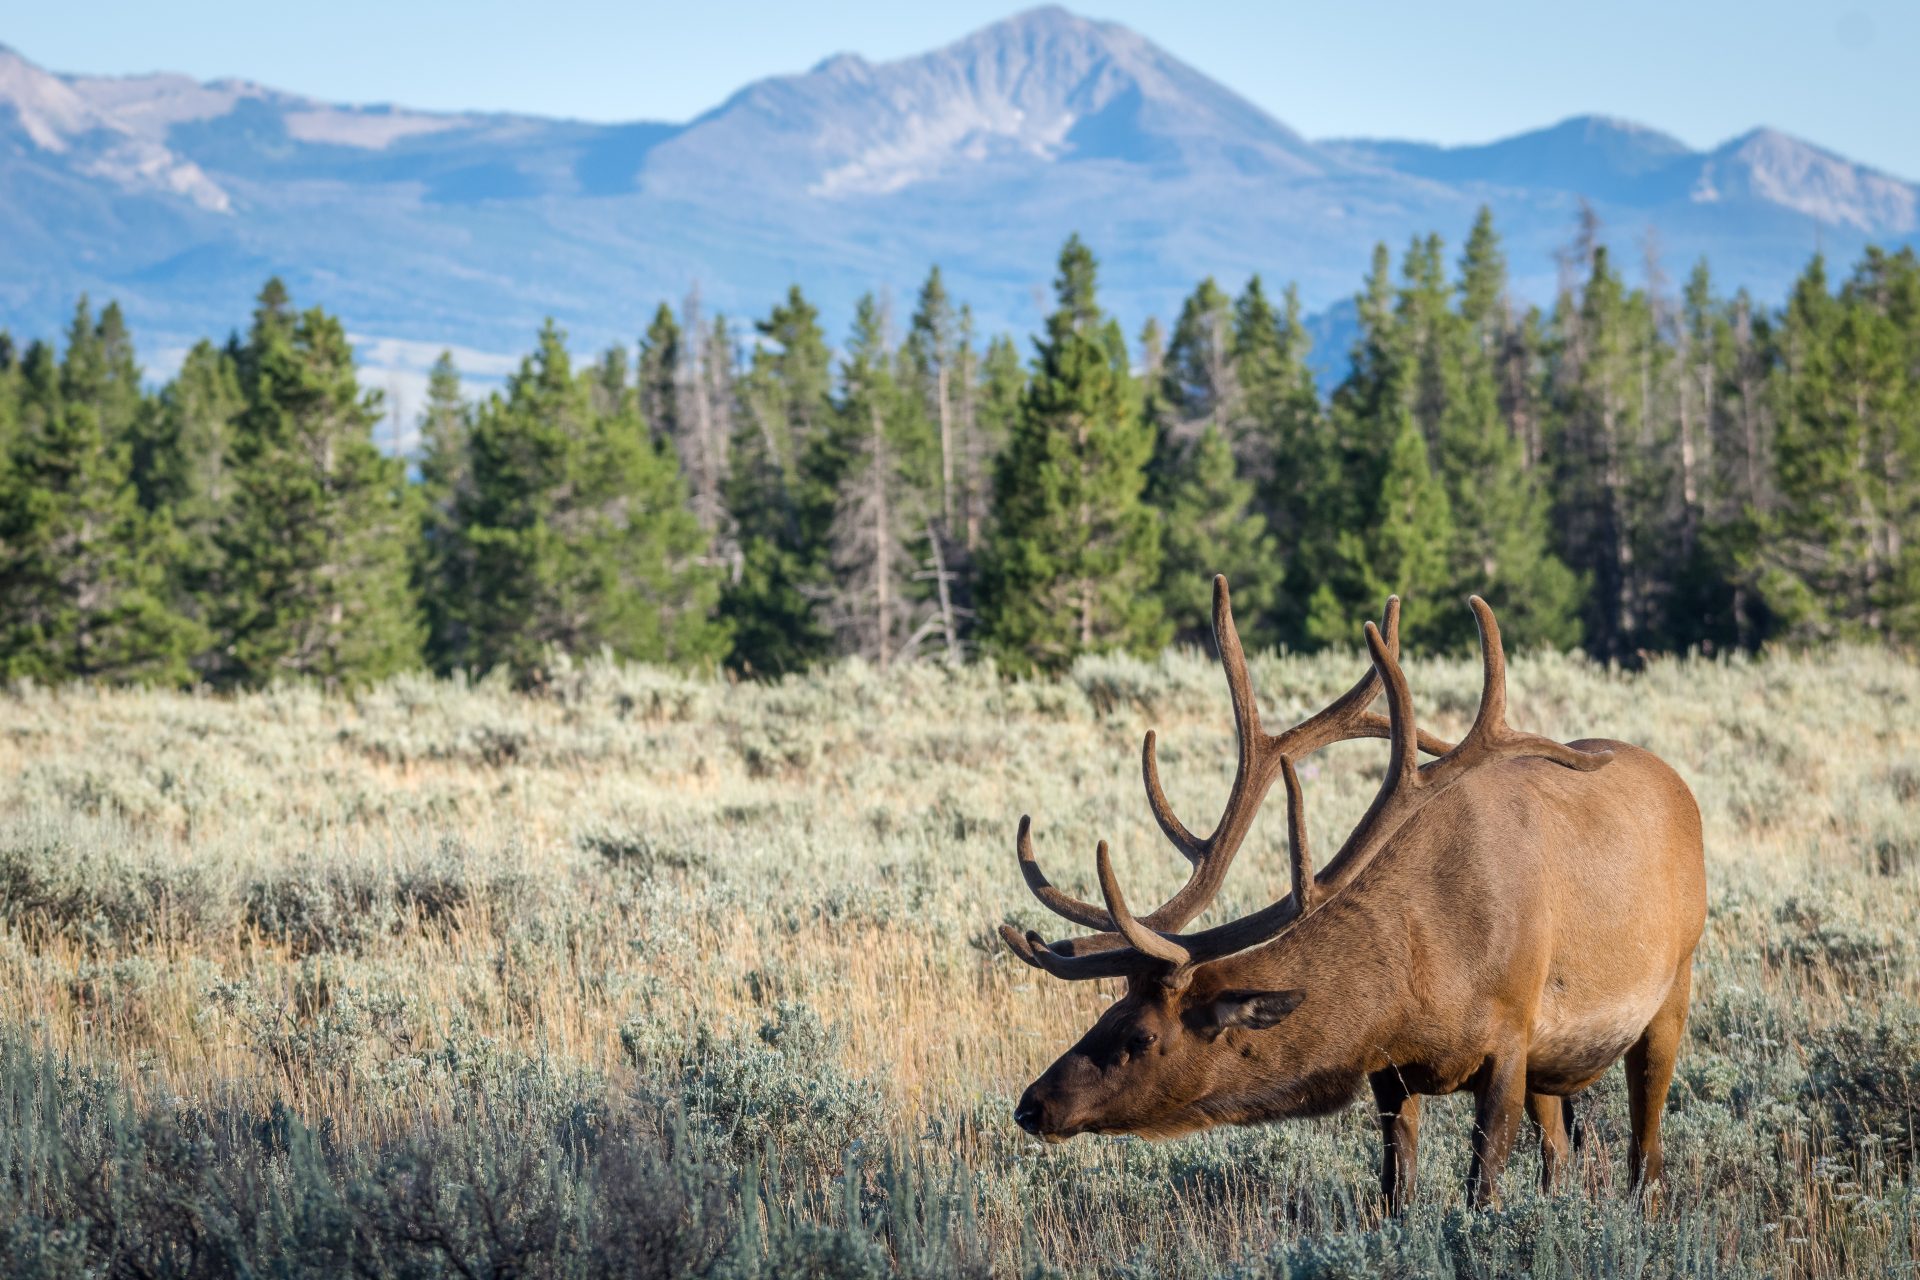 an elk grazing in an open forest field with mountains in the background